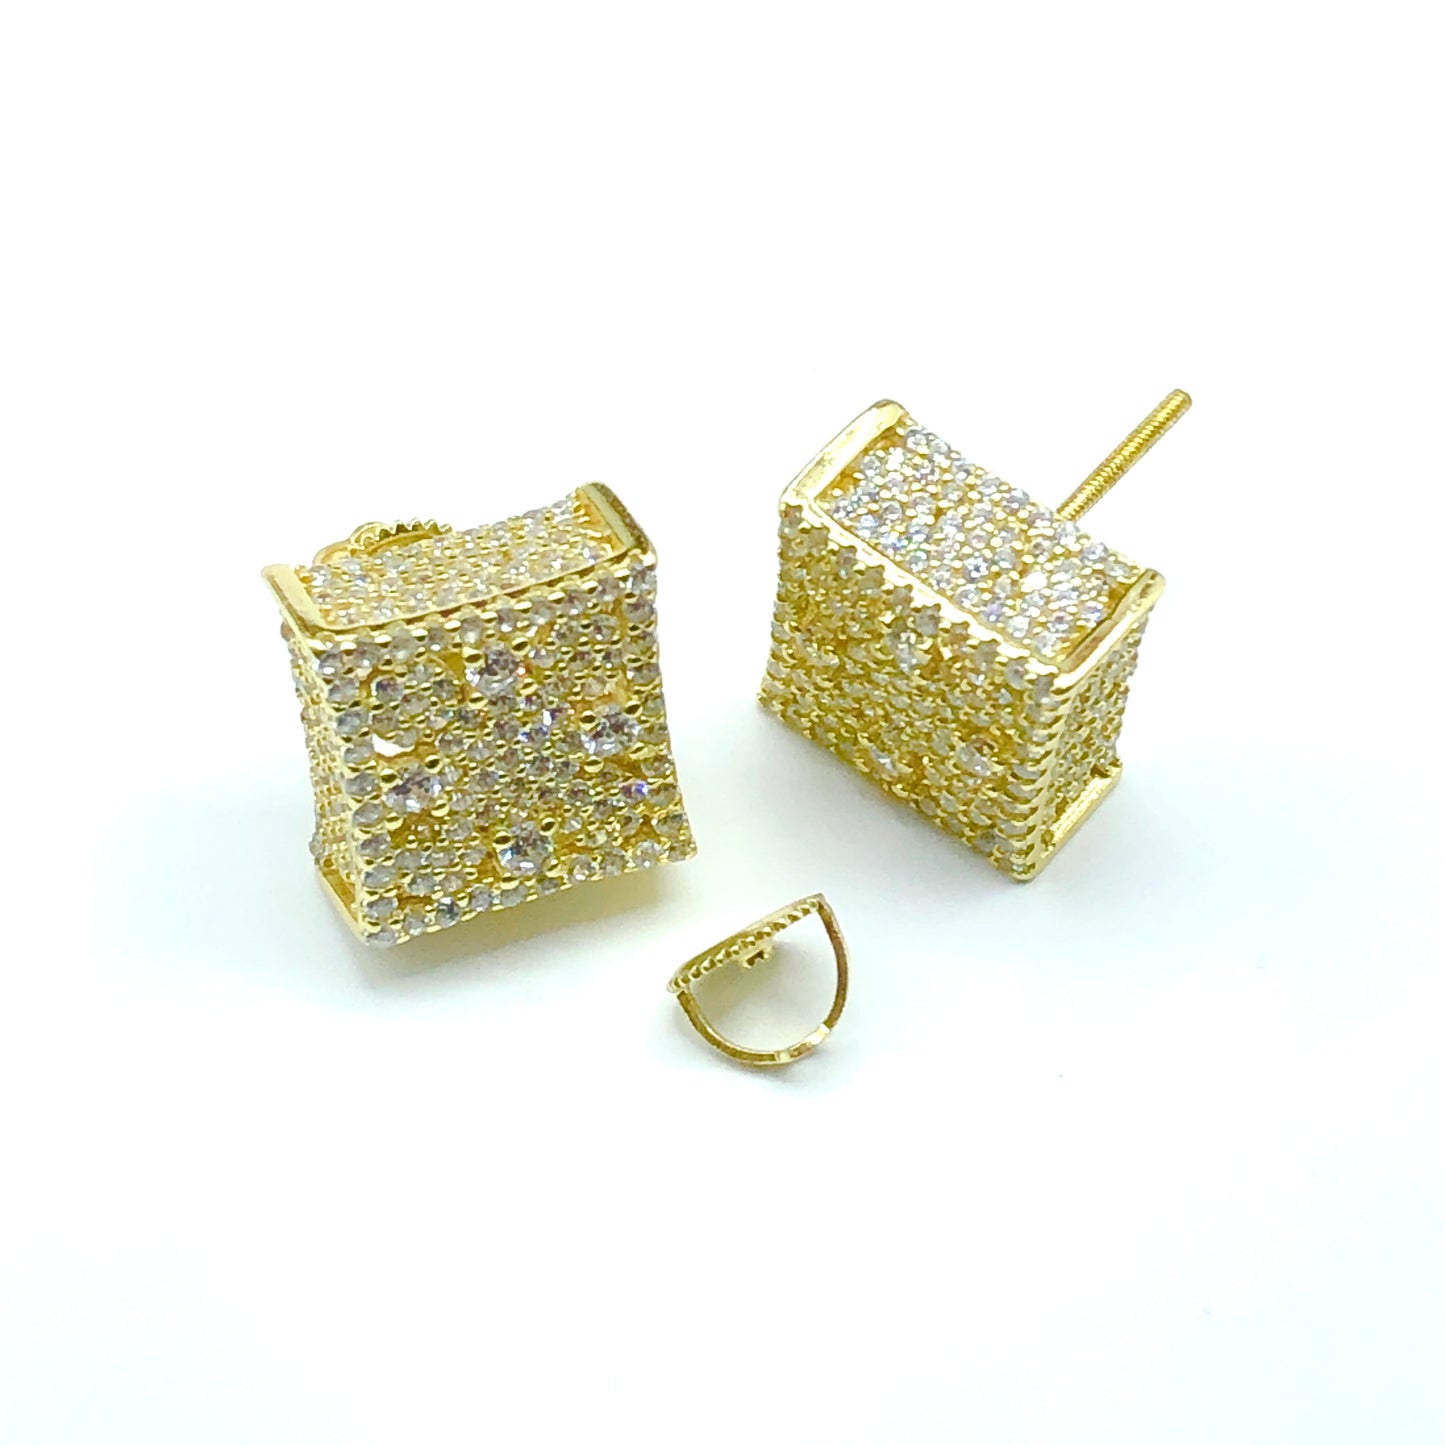 Iced Out Stud Earrings | Bold Sterling Silver Gold Square Earrings